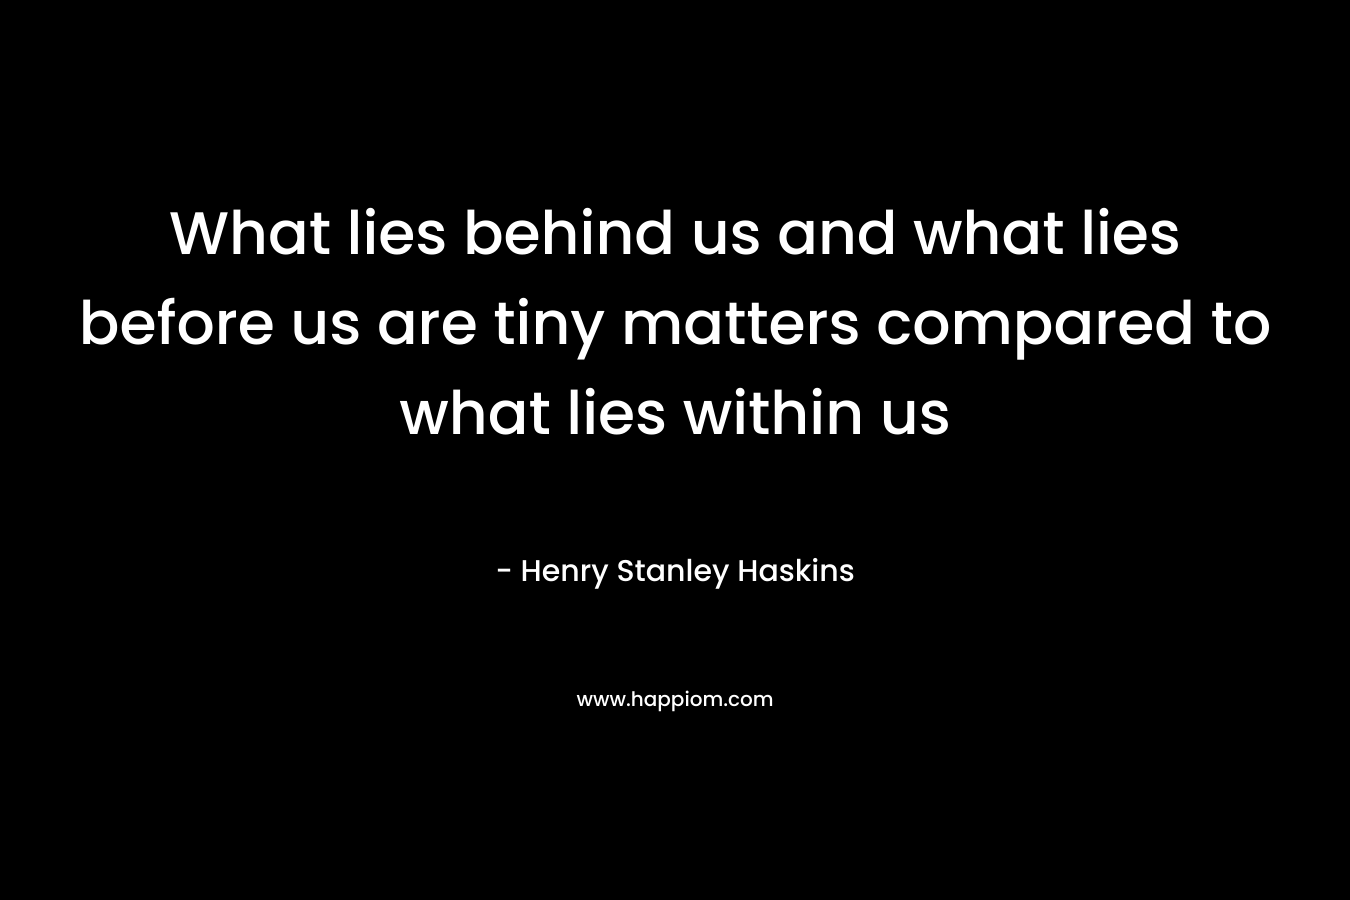 What lies behind us and what lies before us are tiny matters compared to what lies within us – Henry Stanley Haskins